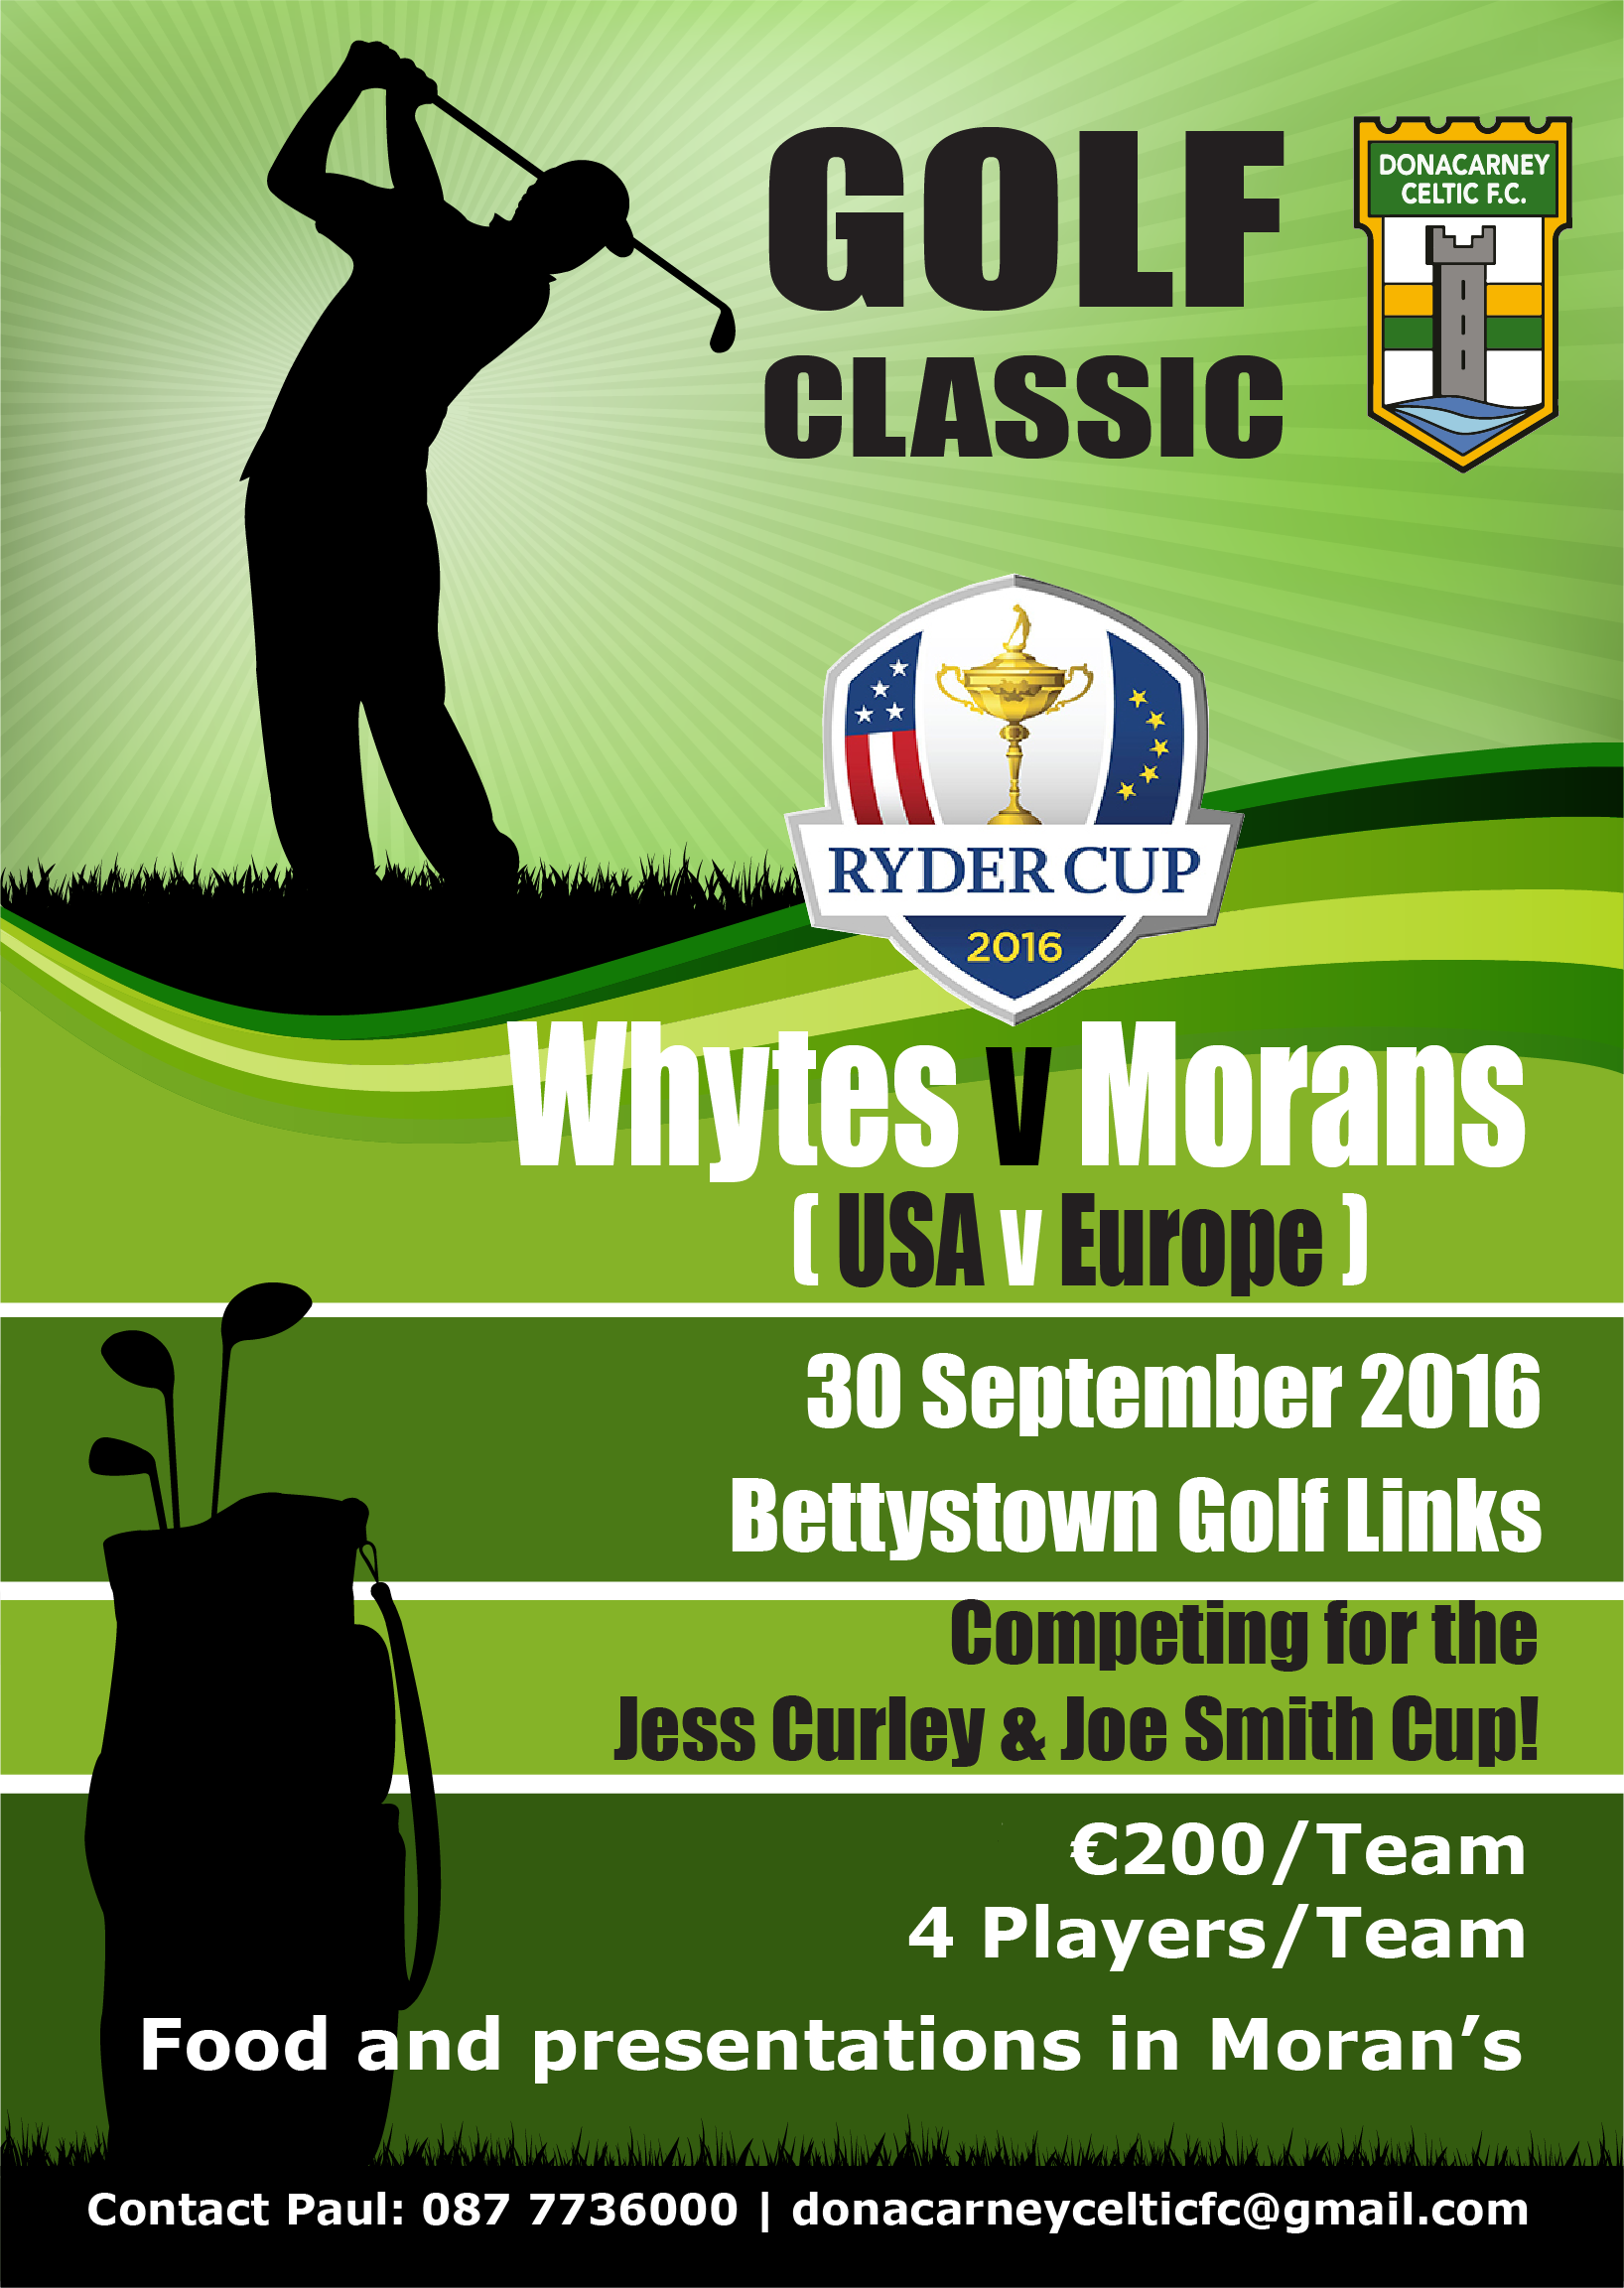 DCFC's Golf Classic is Back... Time to dust off your clubs and assemble a team. 